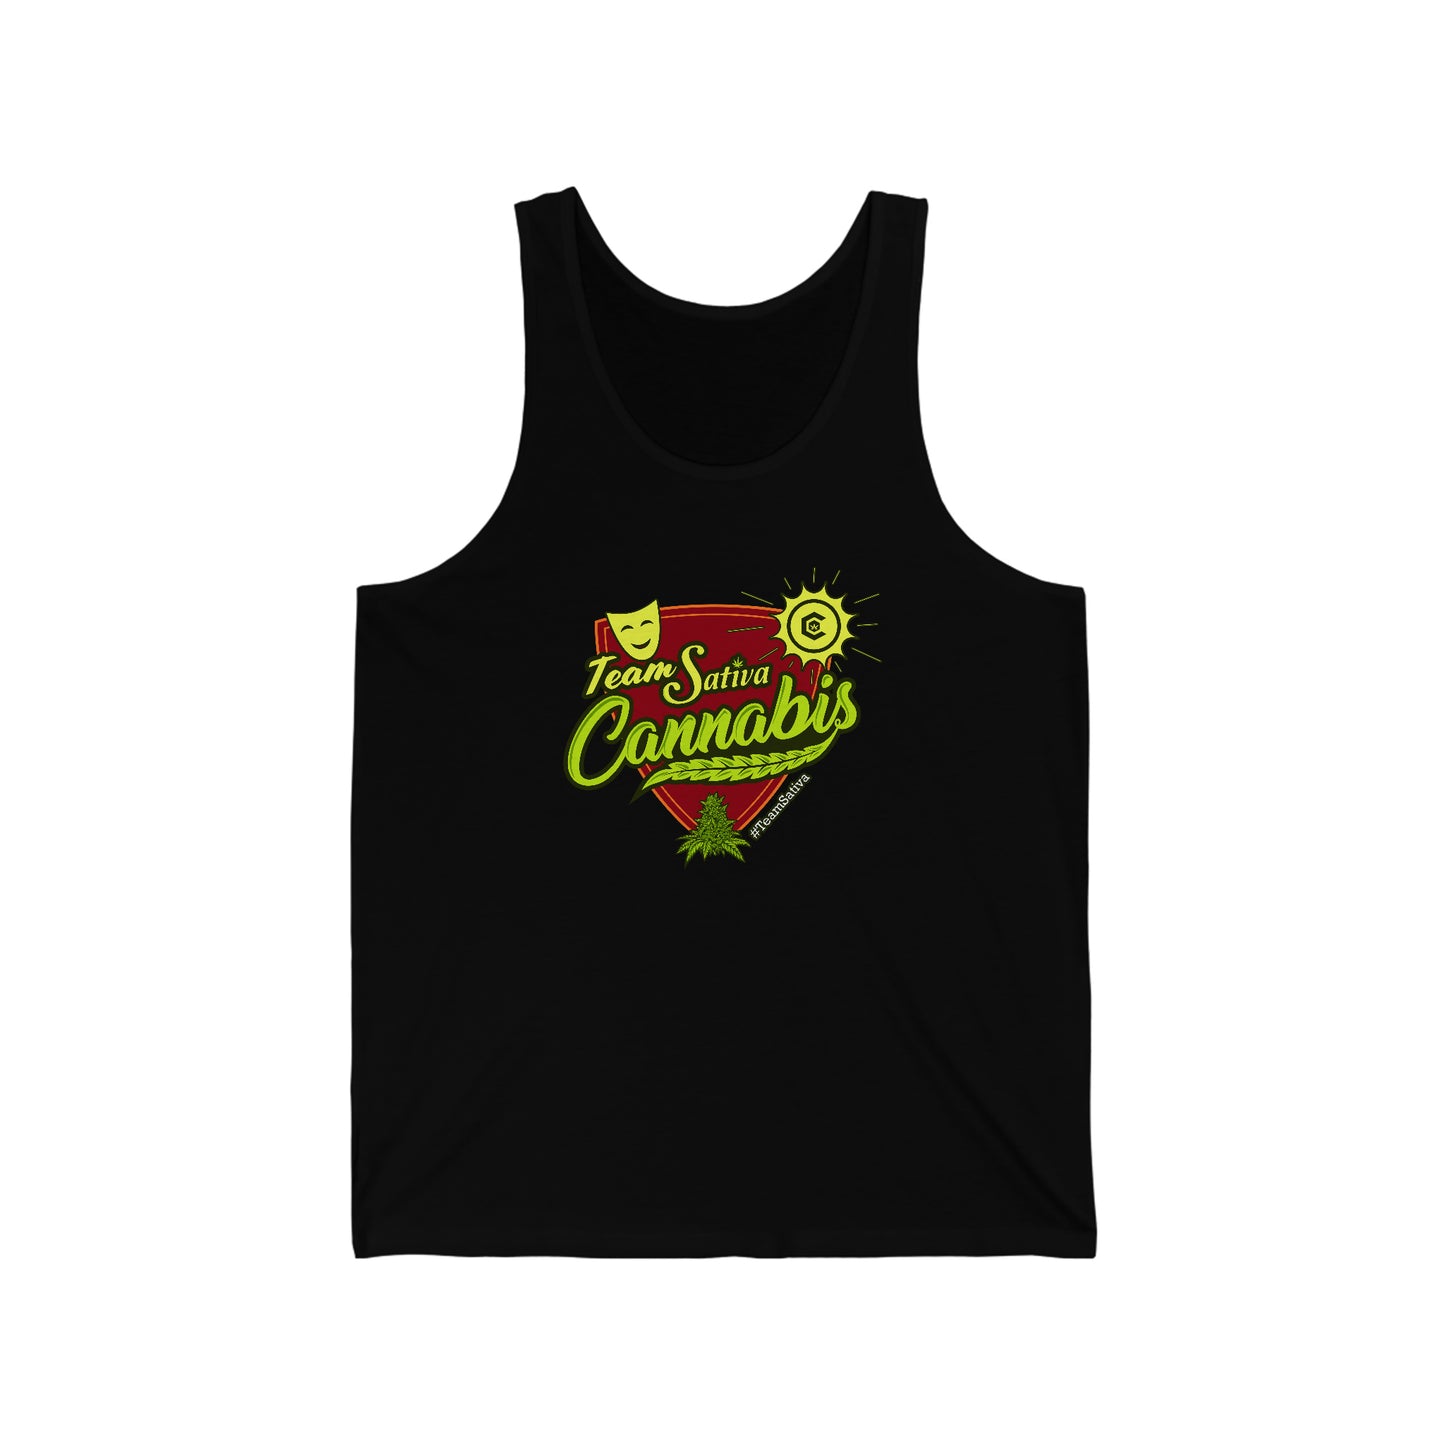 a Team Sativa Cannabis Jersey Tank tank top with a green and yellow logo on it.